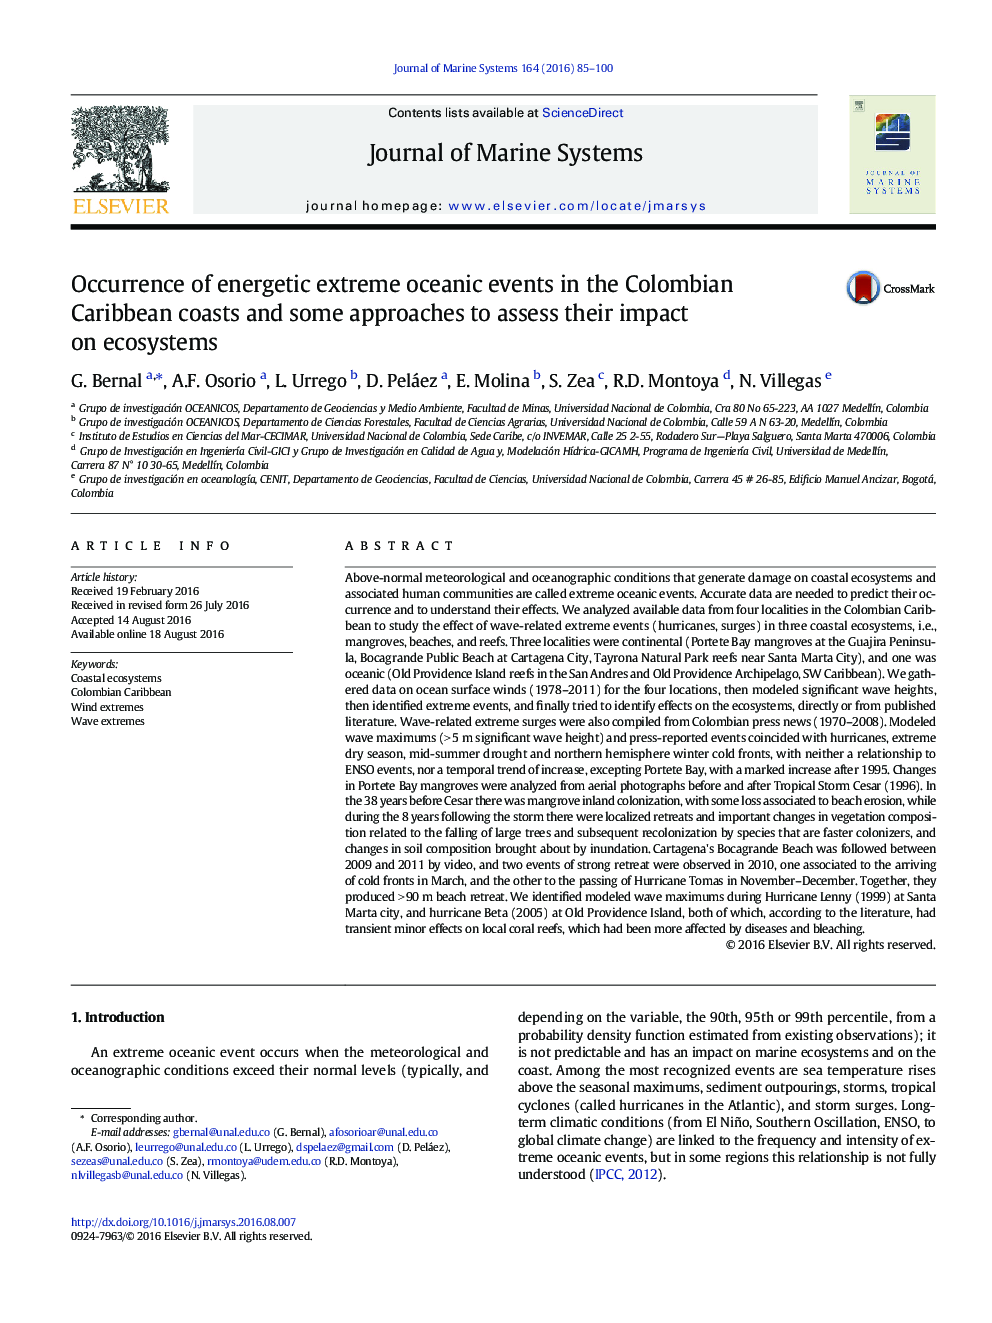 Occurrence of energetic extreme oceanic events in the Colombian Caribbean coasts and some approaches to assess their impact on ecosystems